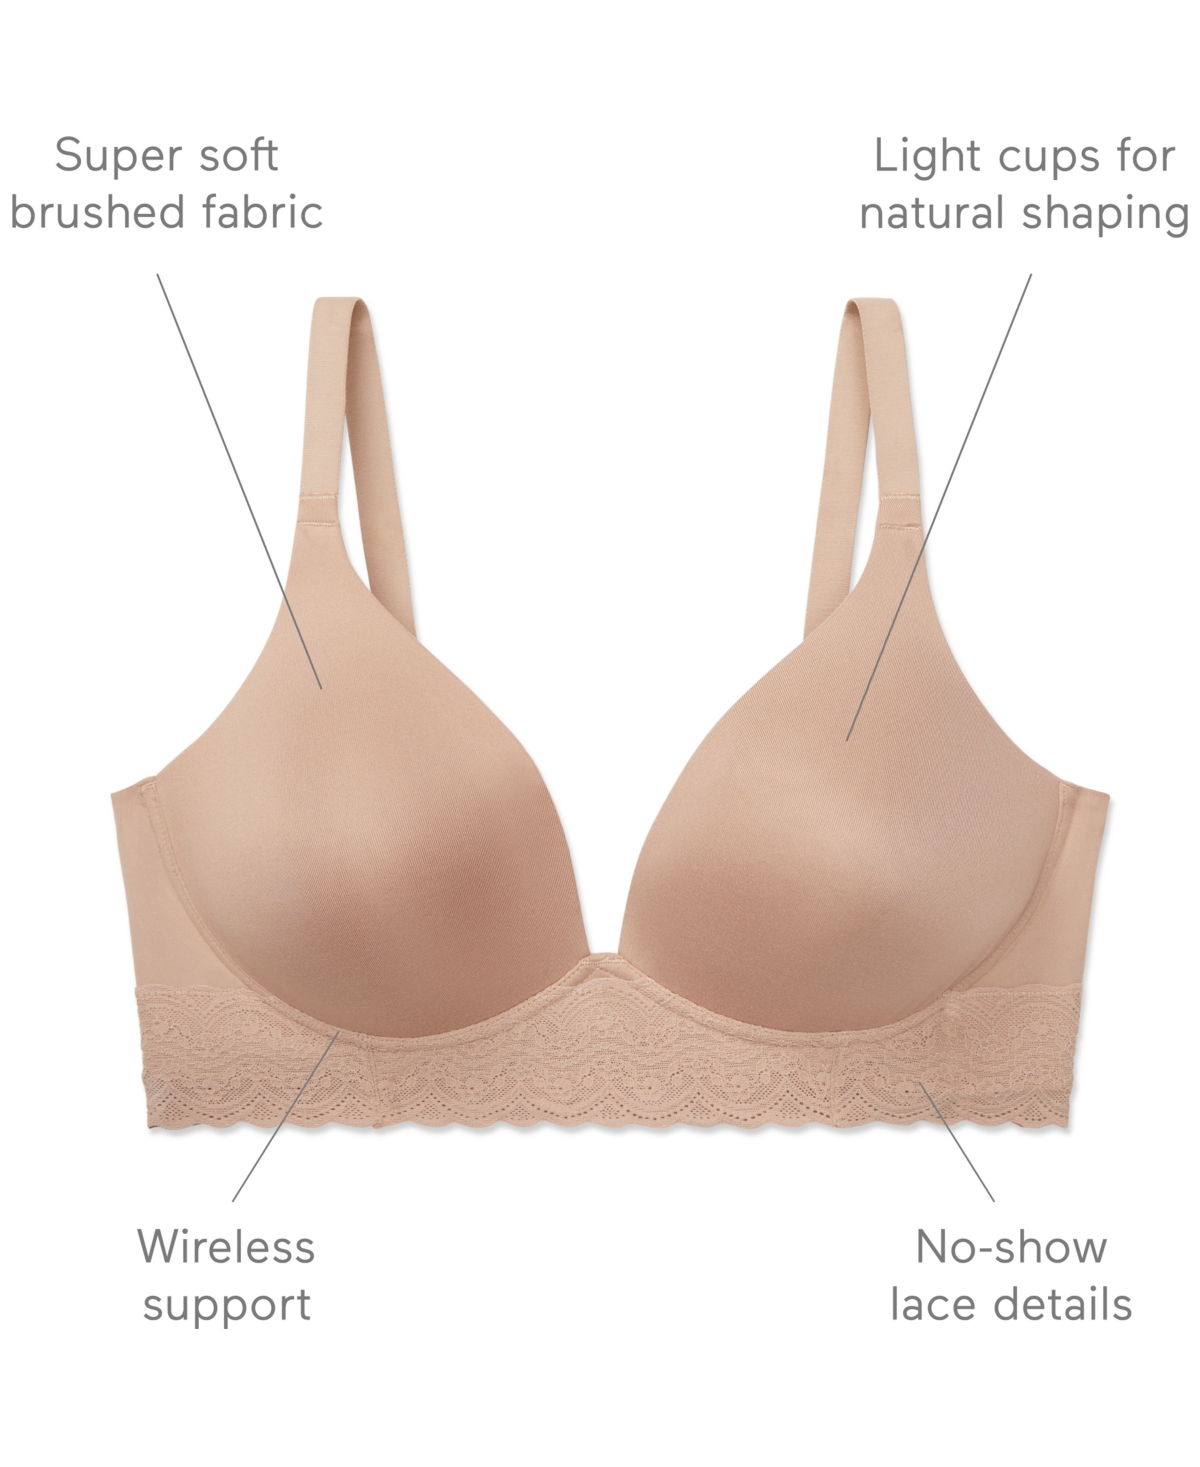 Buy Warner's Women's Cloud 9 Wire-Free Bra, Toasted Almond, 34C at